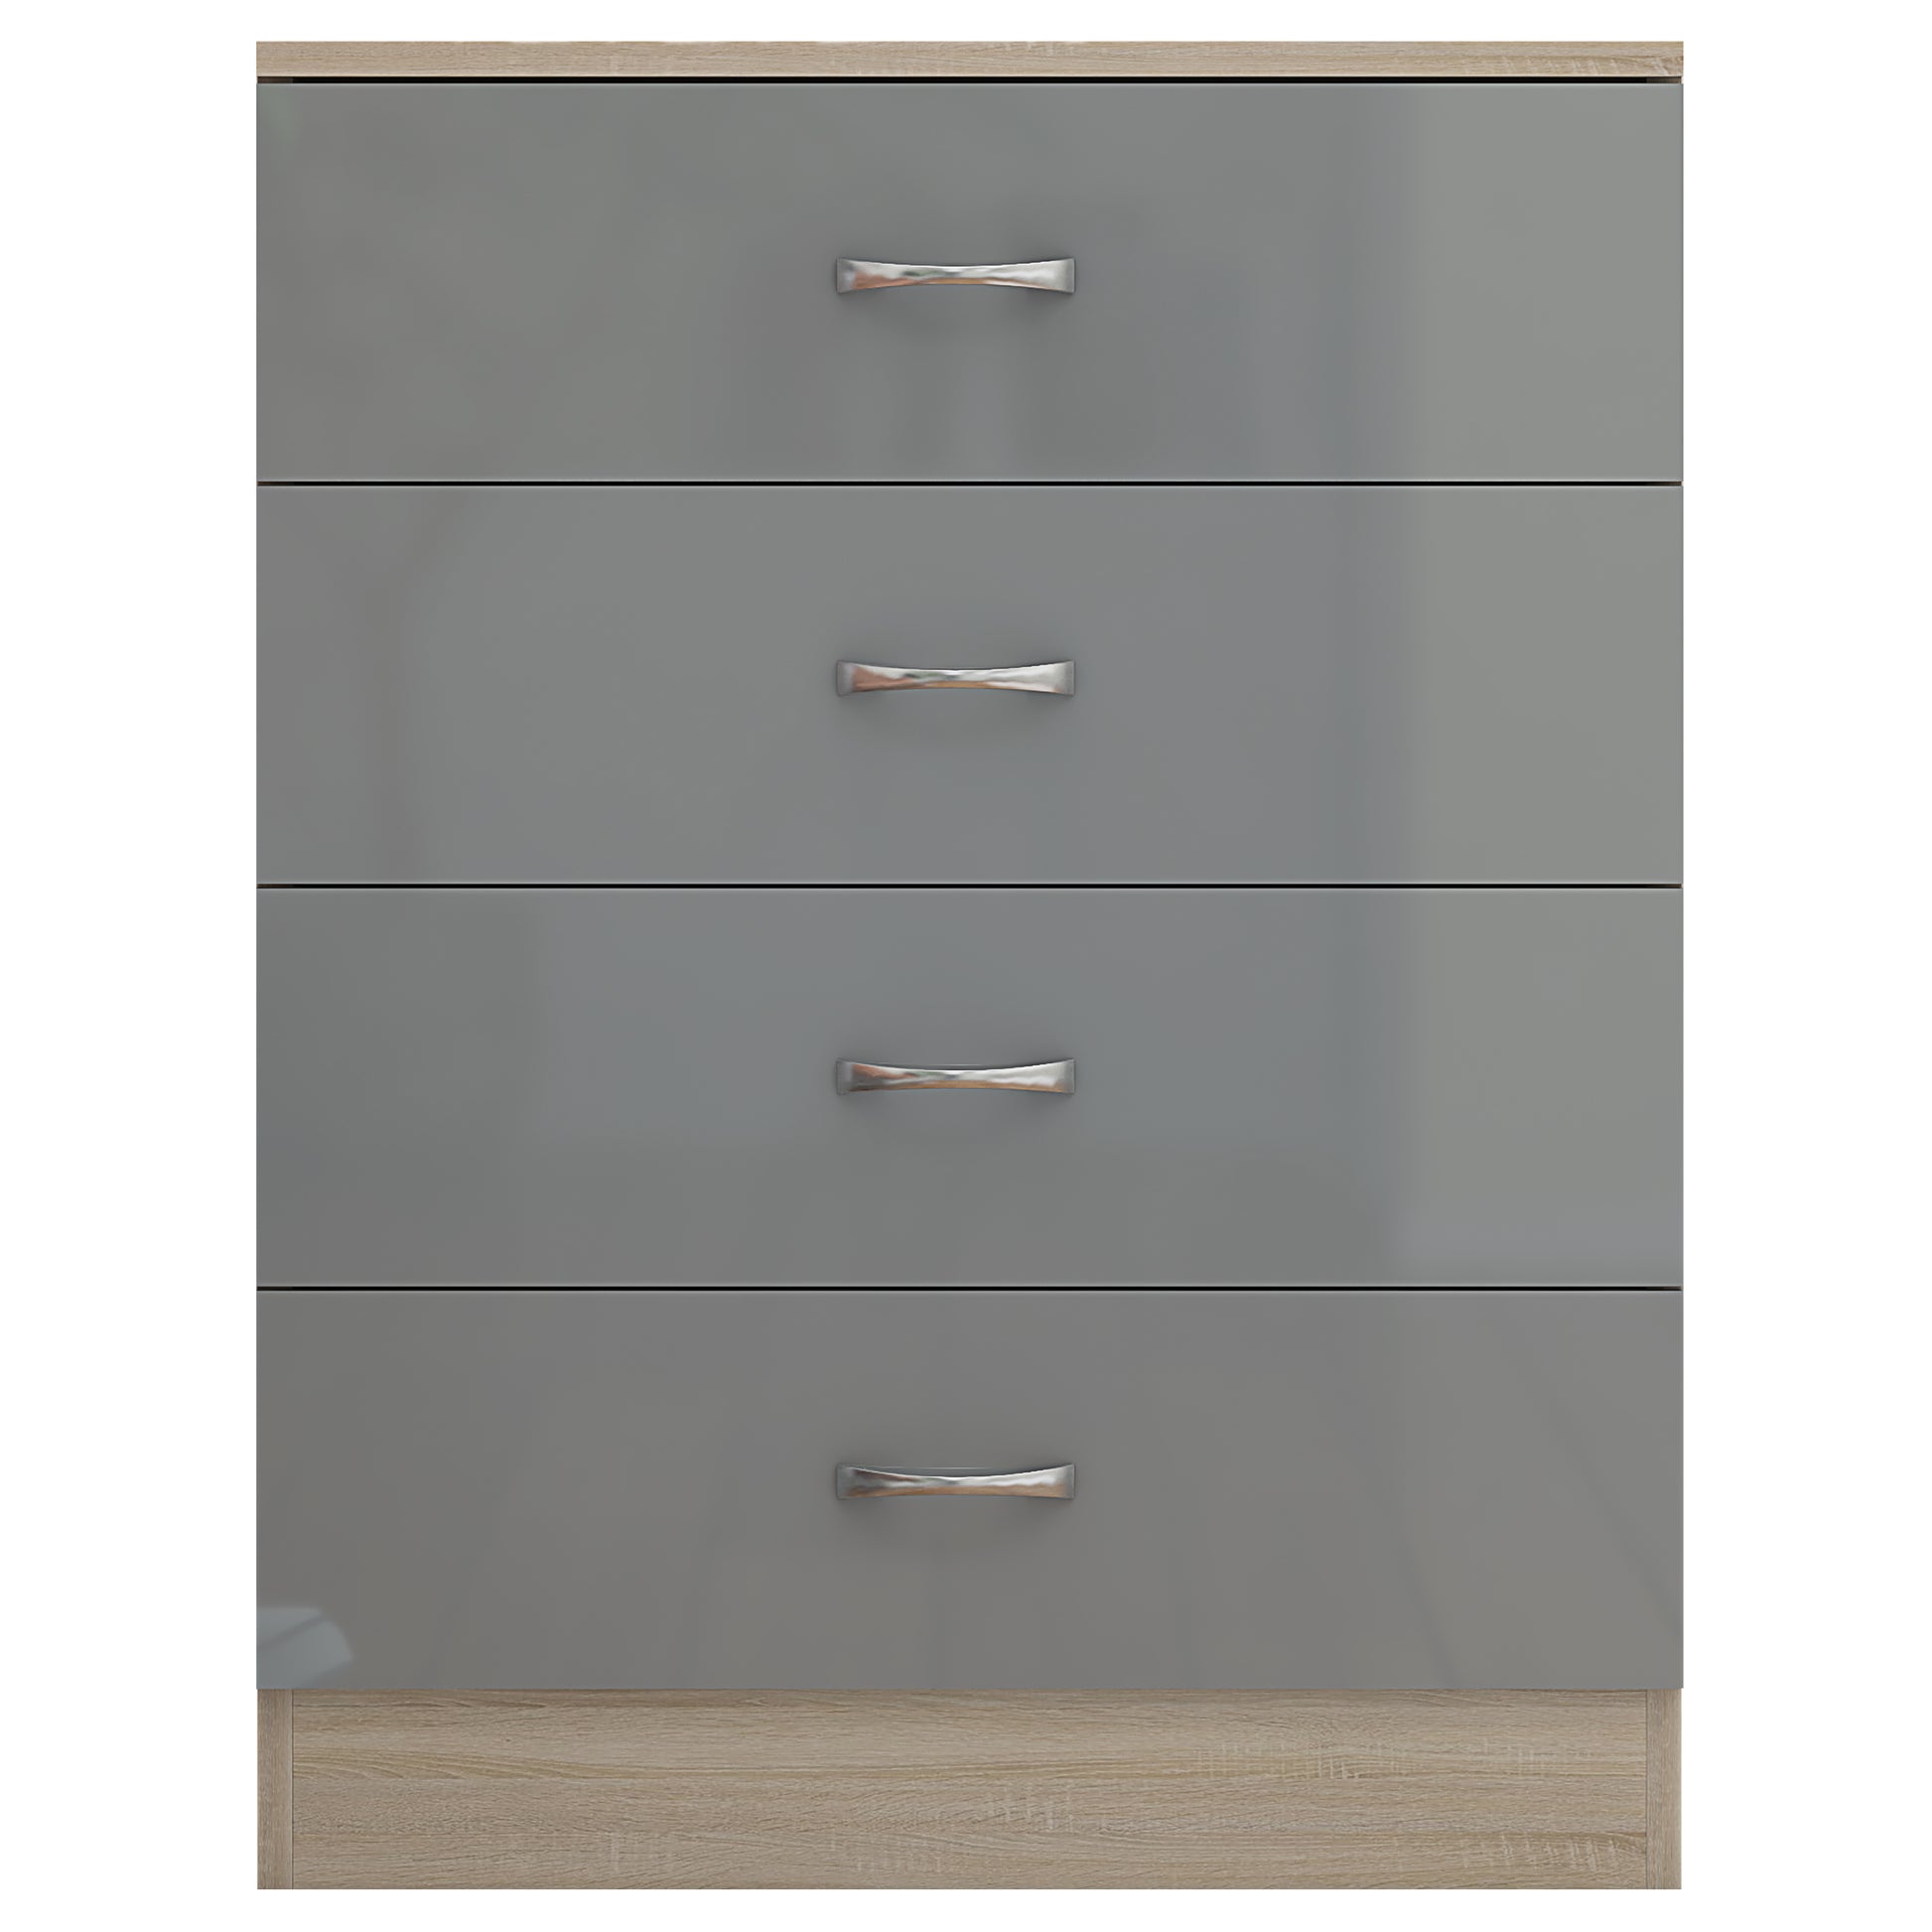 Bid on 4 DRAWER CHEST - HIGH GLOSS GREY ON SONOMA OAK FRAME- Buy &amp; Sell on Auction with EAMA Group